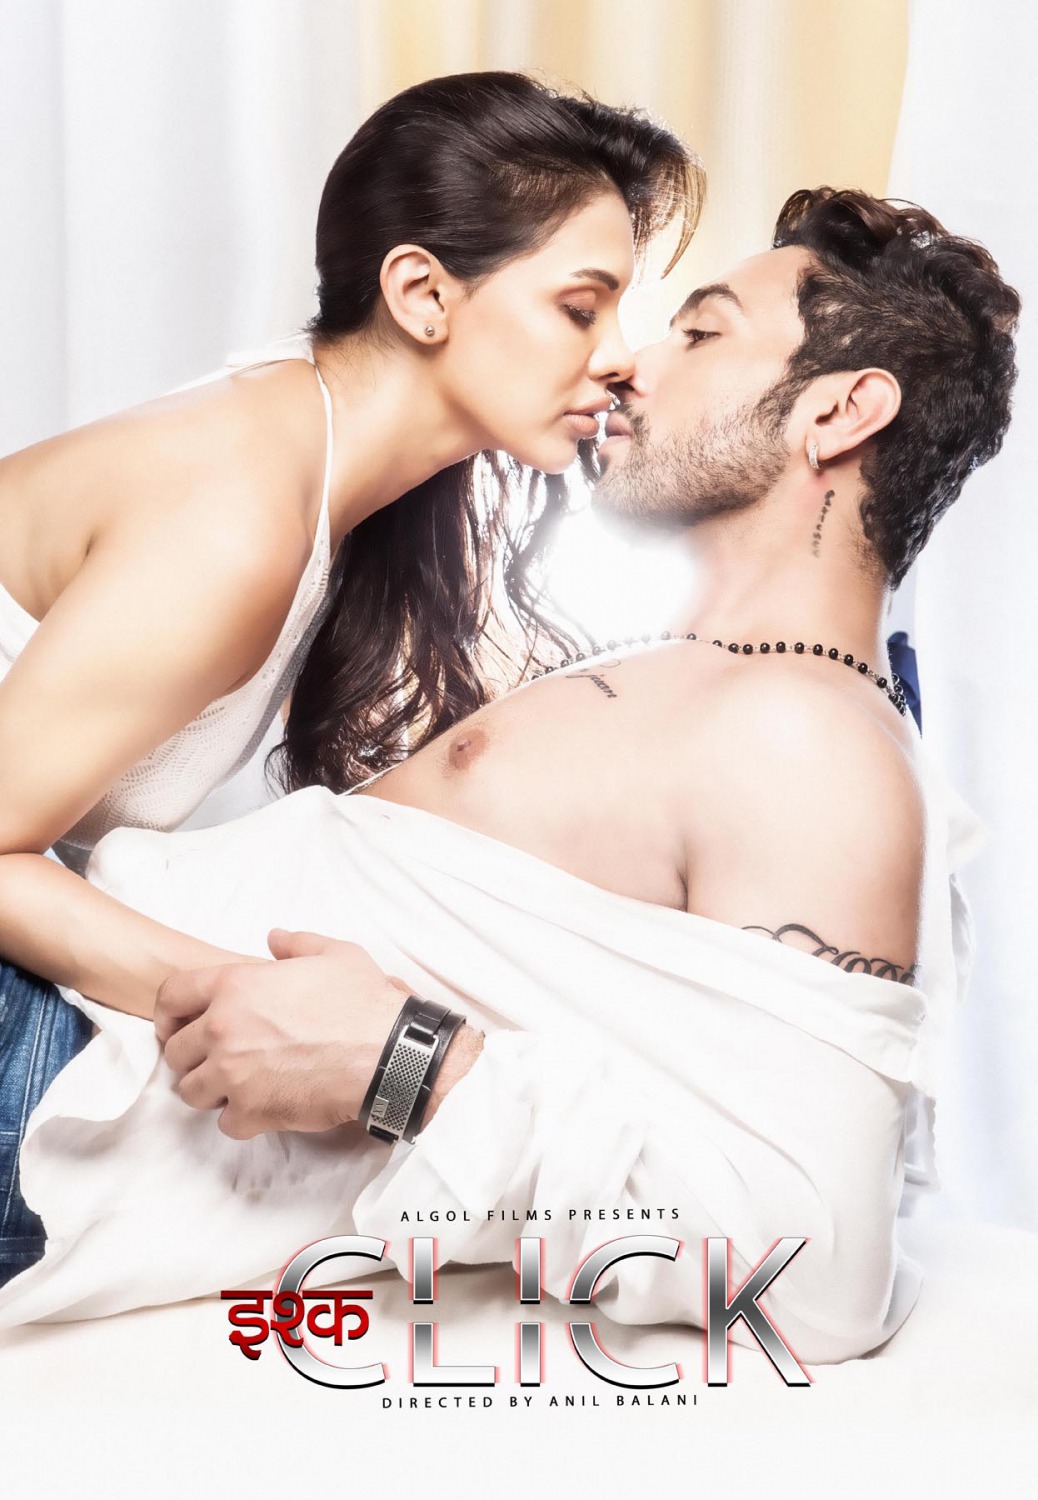 Extra Large Movie Poster Image for Ishq Click (#2 of 2)